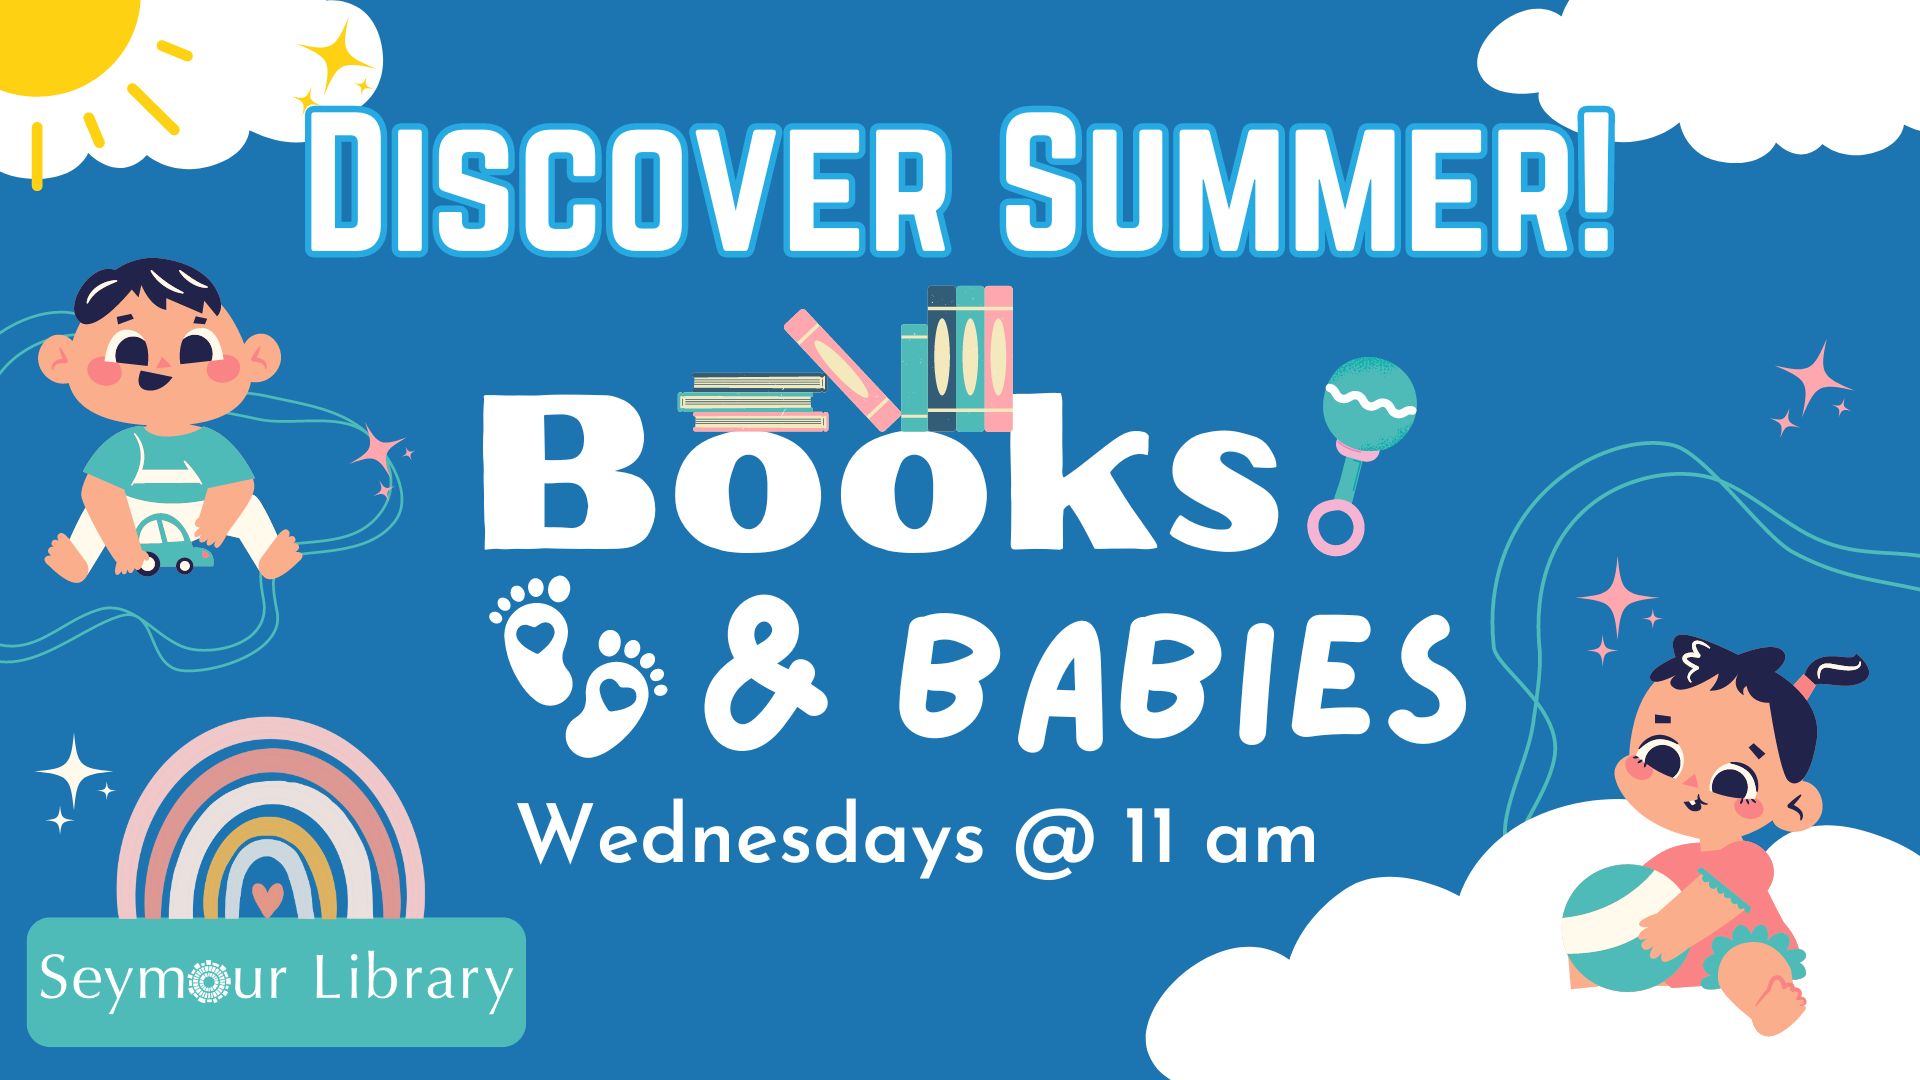 Books and Babies Wednesdays at 11am at Seymour Library - with logo and graphic of babies